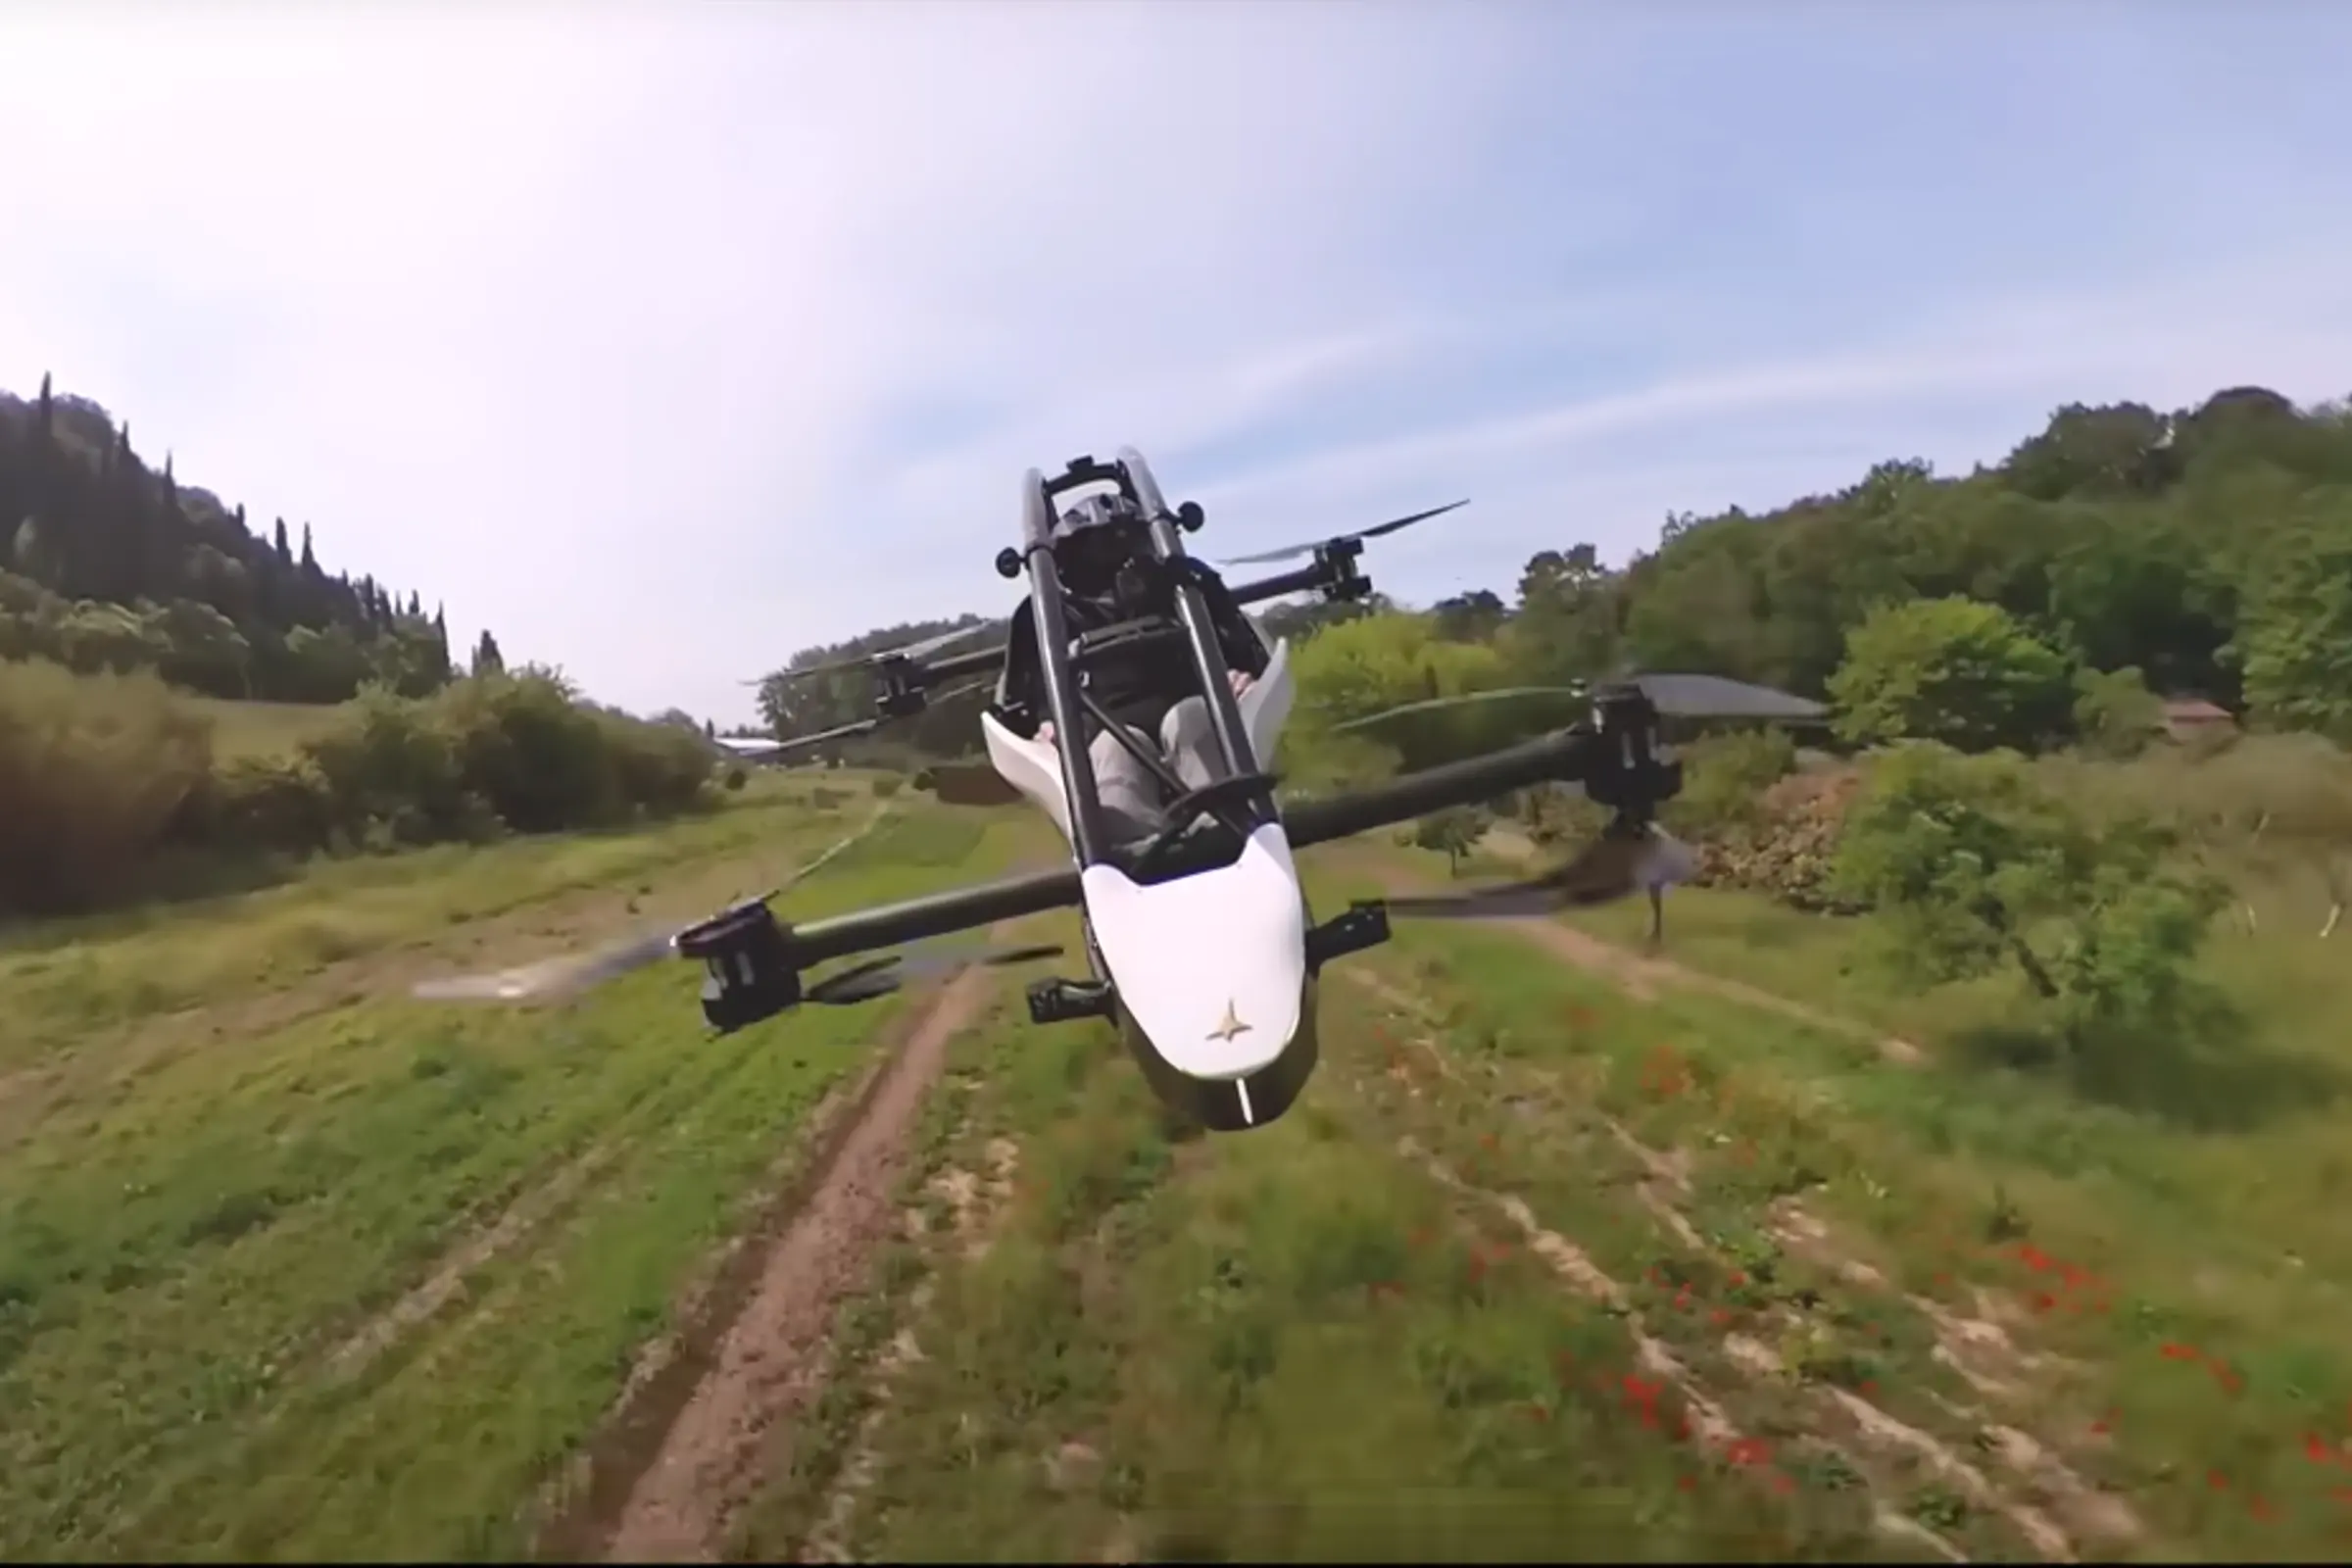 Jetson CEO Takes His eVTOL on a Commute to Work